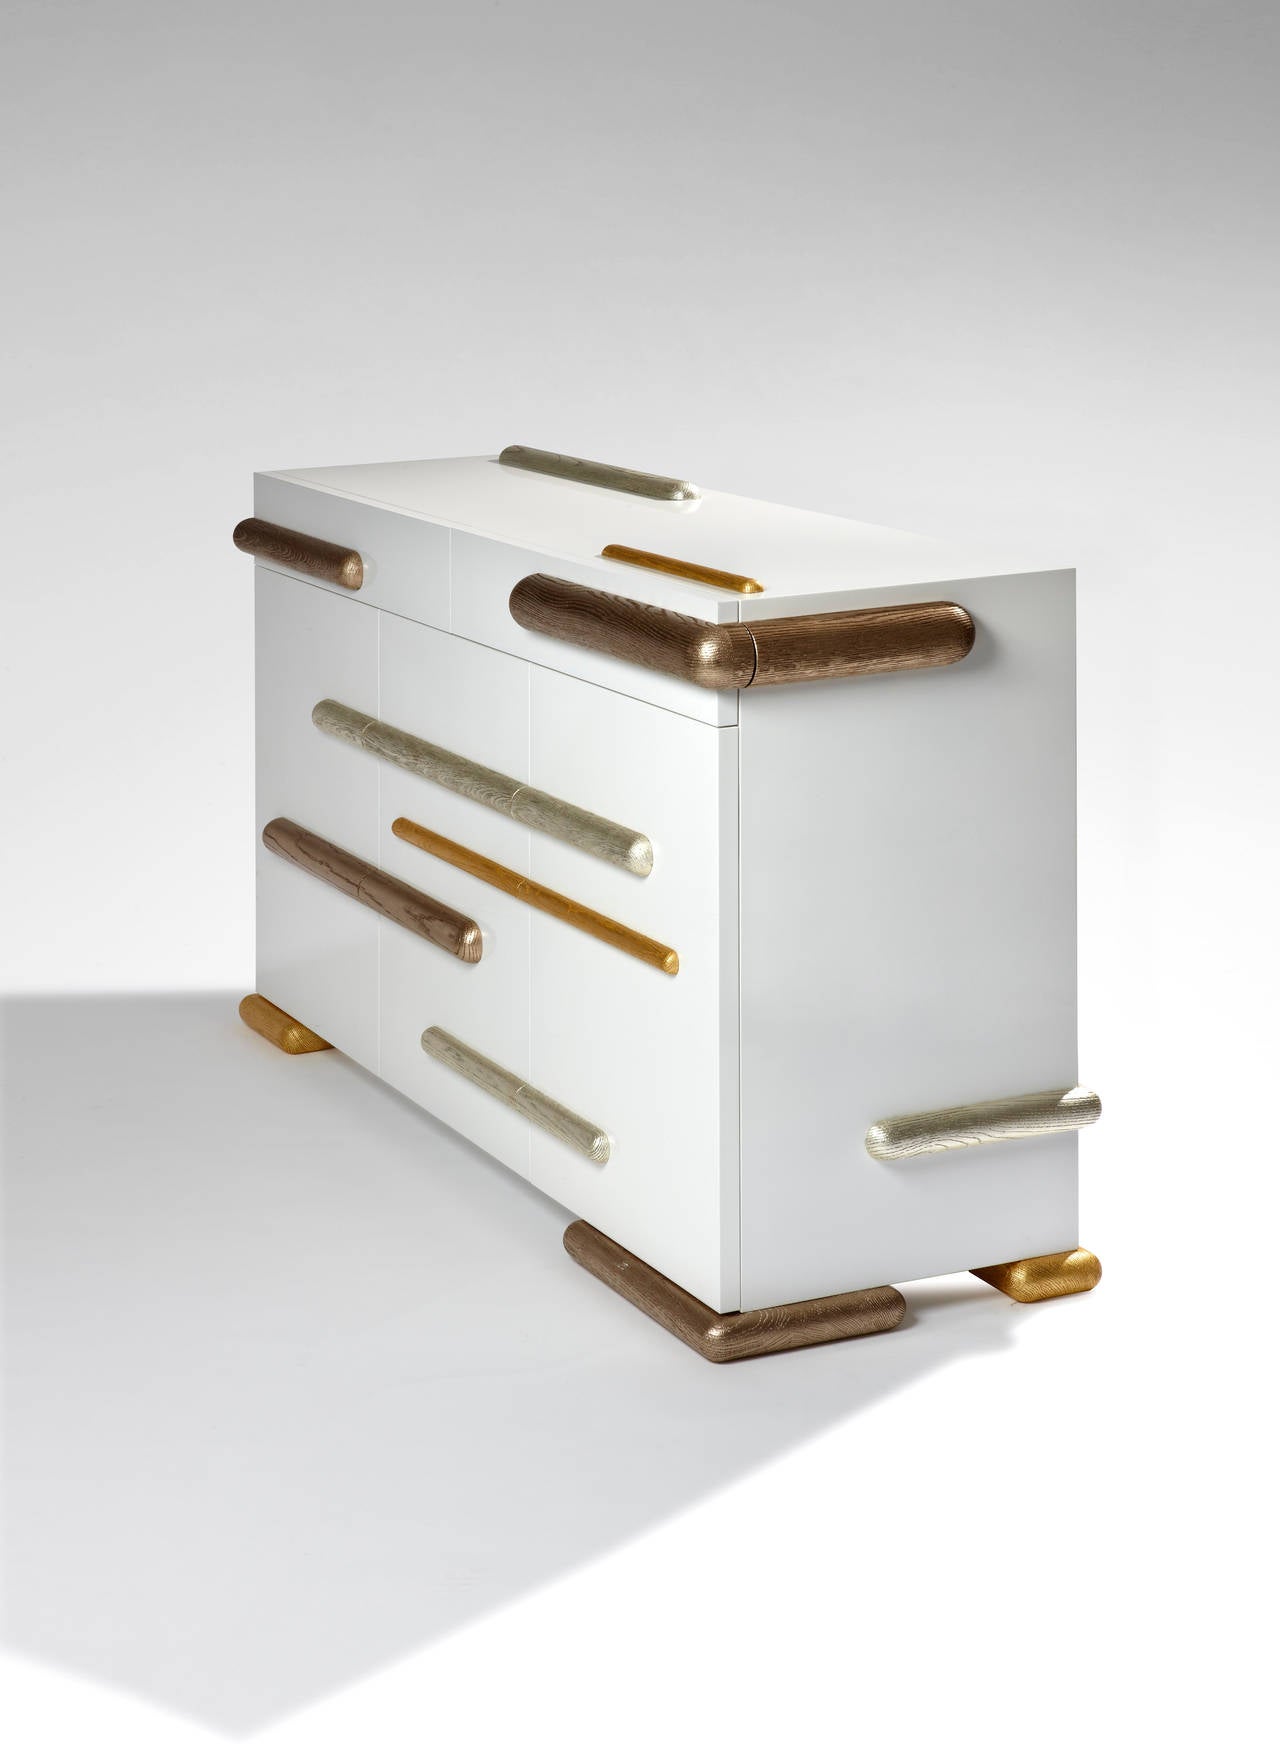 Sideboard.
Cat-Berro Edition 2011
Two small drawers.
Two doors. One central drawer.
Pearly enameled wood. Sanded oak. Gold leaves.
Dimensions: L 60’’, H 35.5’’, D 18’’.
L 150 cm, H 90 cm, P 45 cm.

Signed piece of a limited edition of 8 + 2 AP +